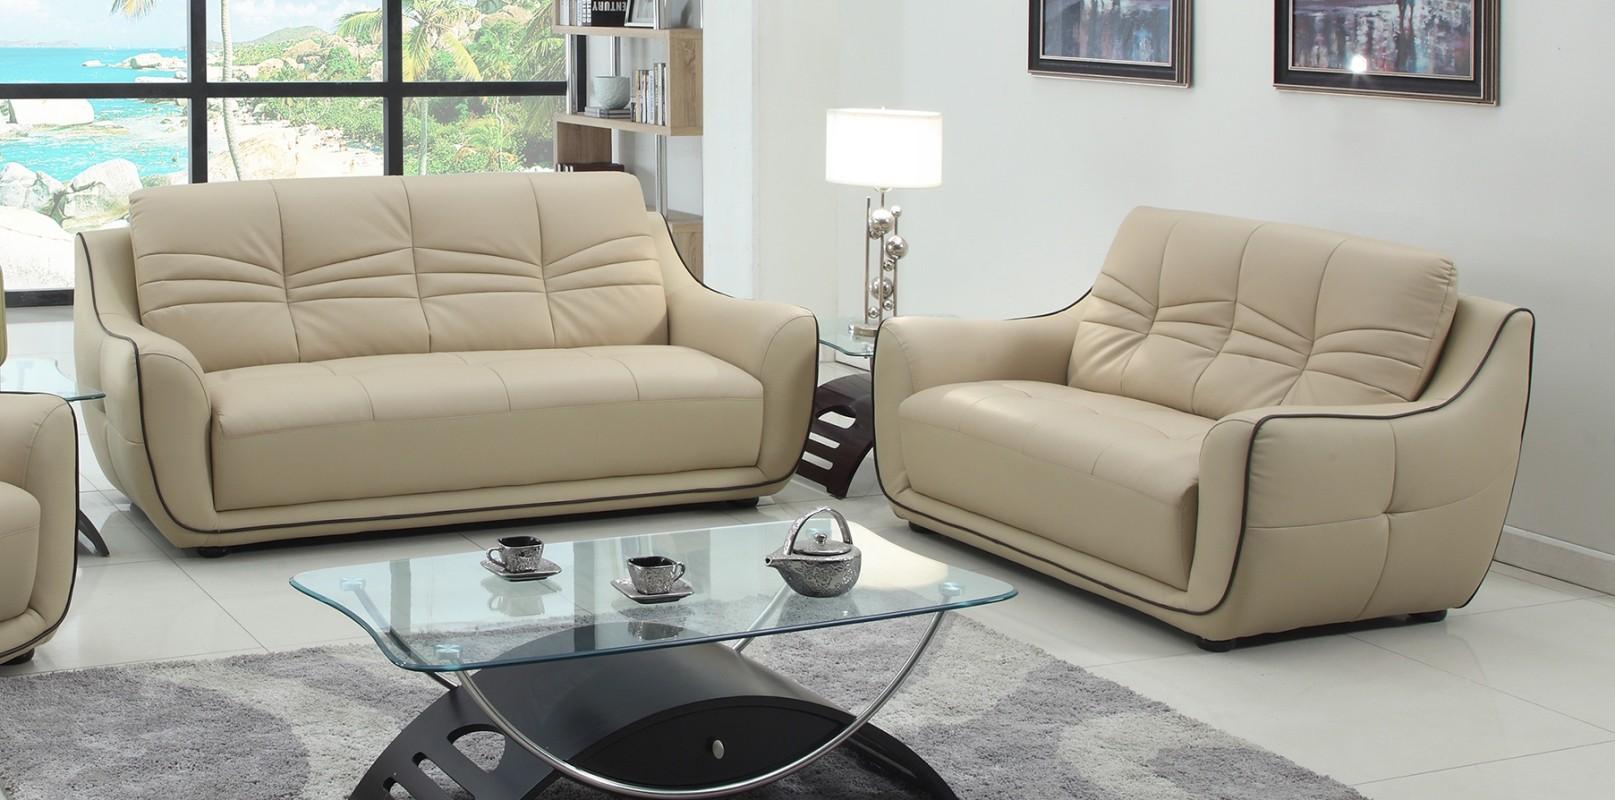 Contemporary Sofa and Loveseat Set 2088 2088-BEIGE-2PC in Beige Leather Air Material